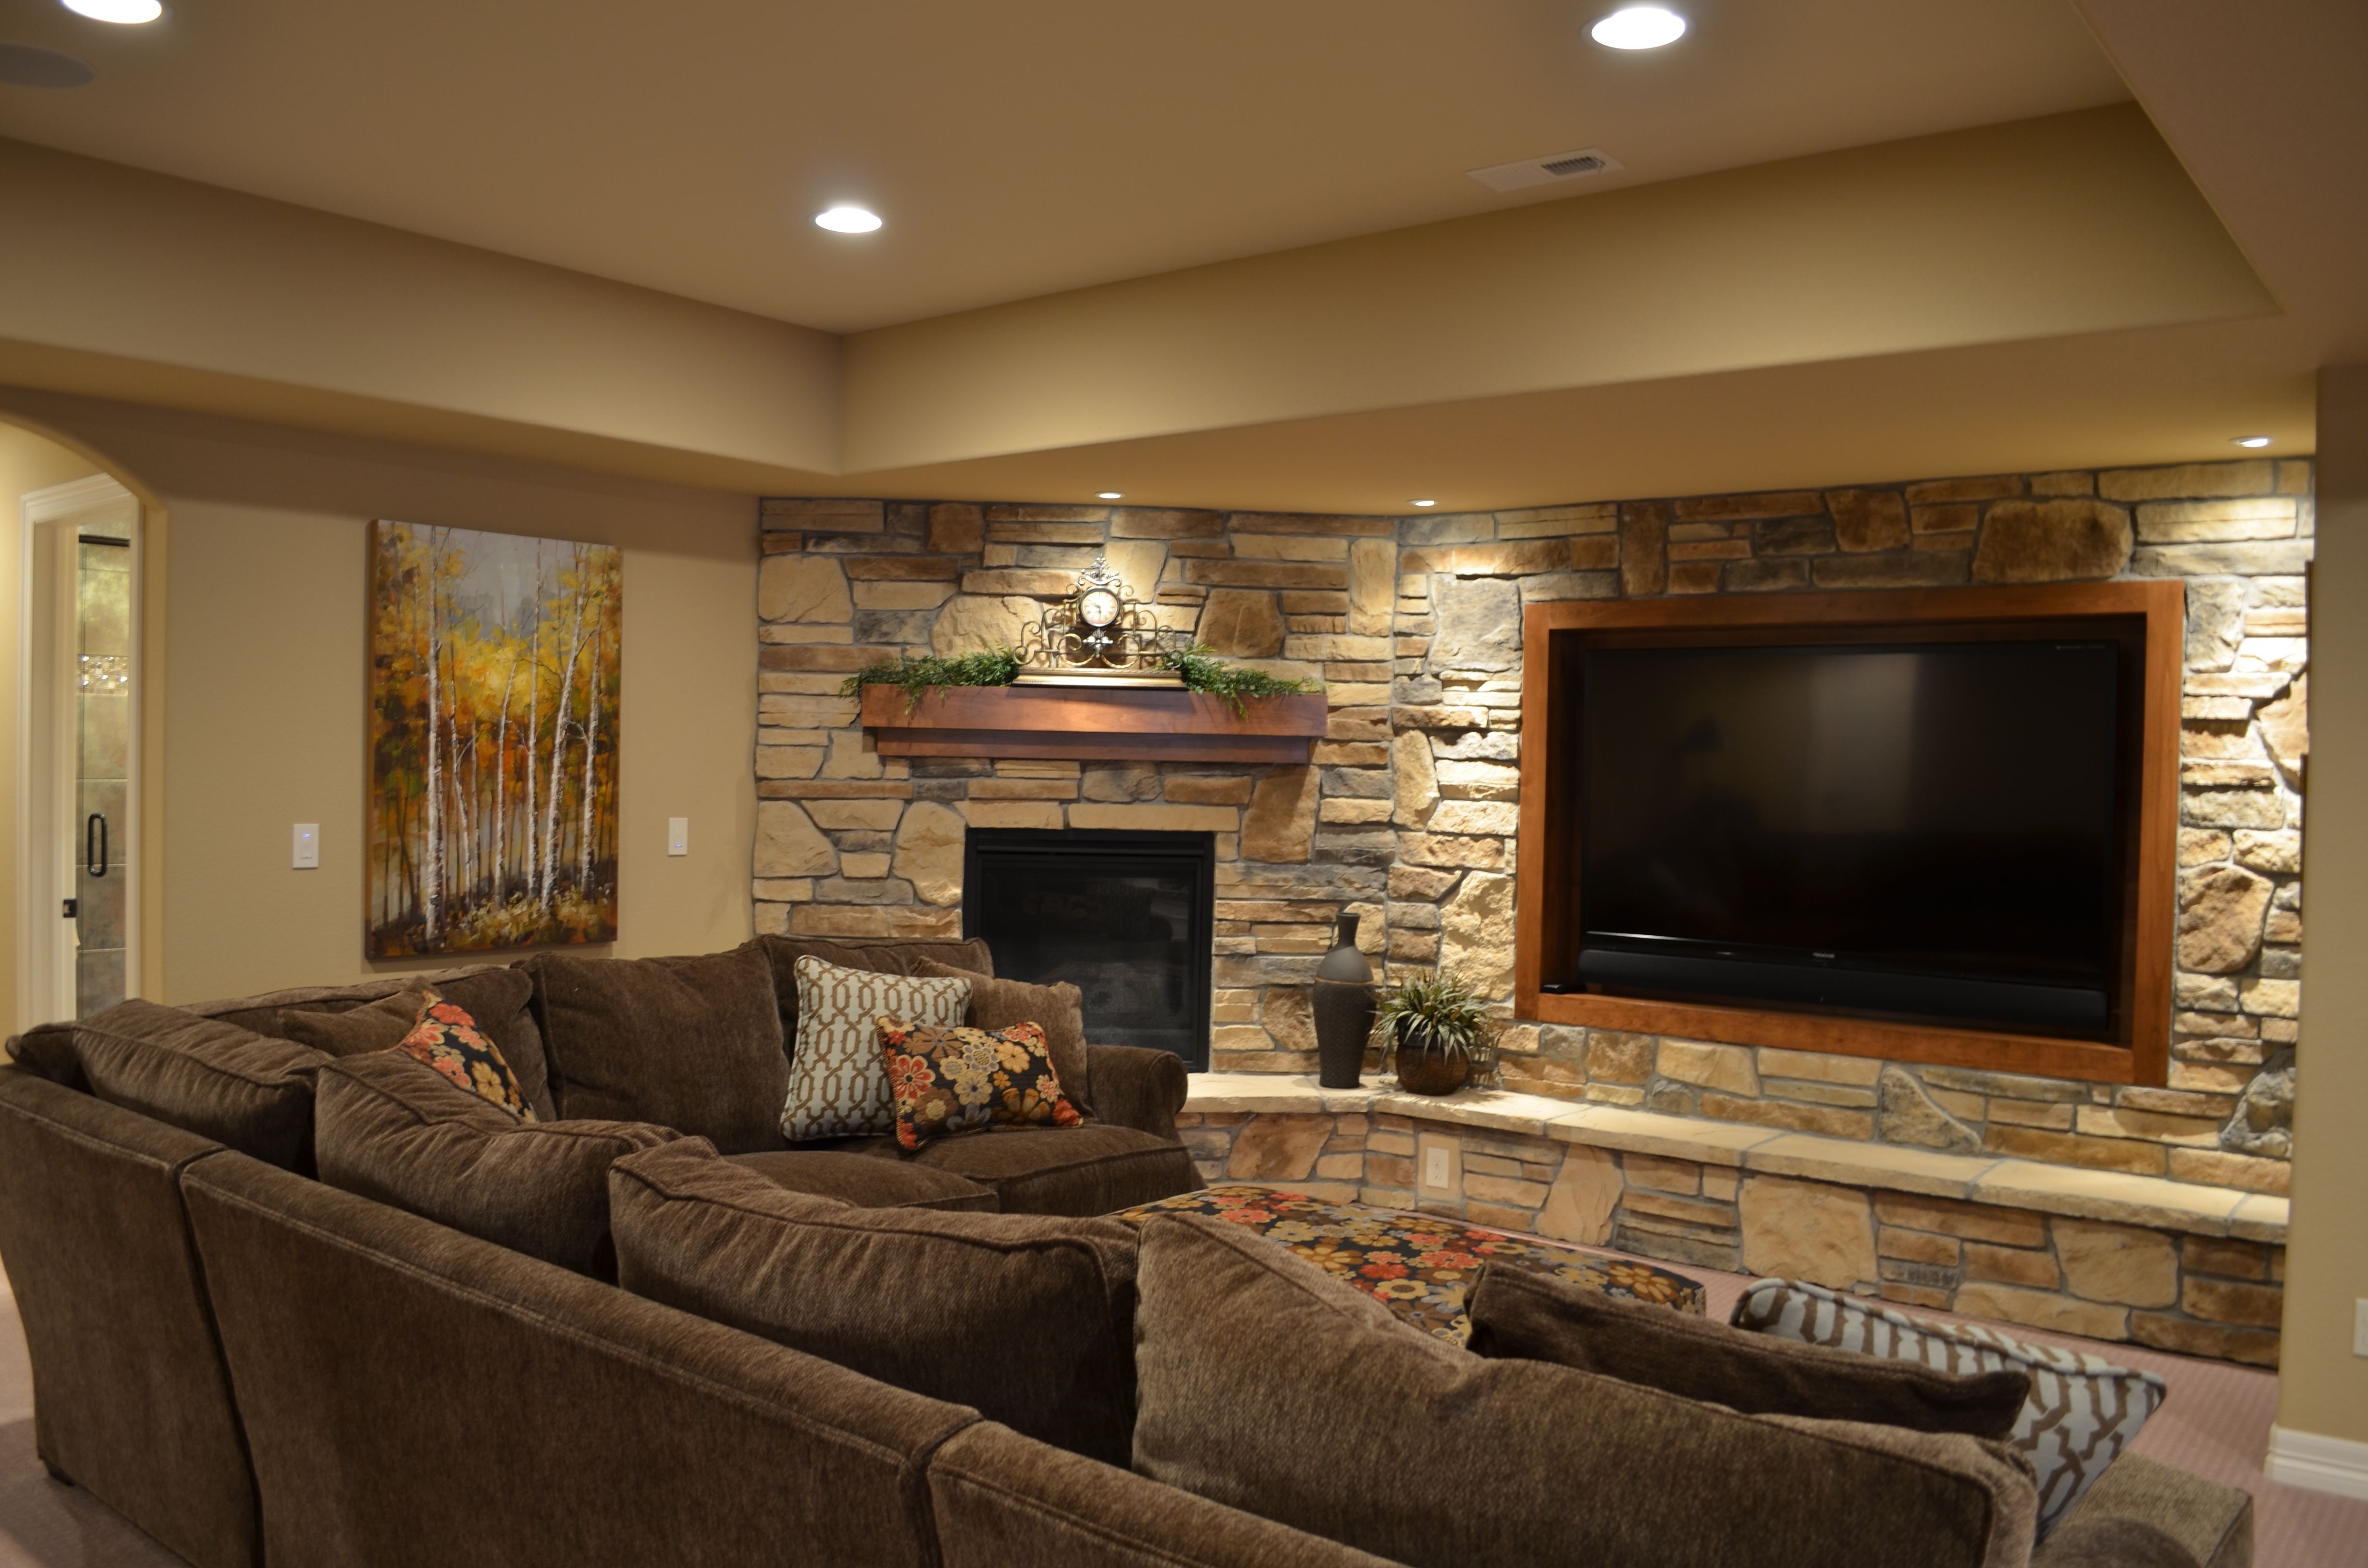 Favorite Accent Wall Ideas For Basement • Walls Ideas Pertaining To Basement Wall Accents (View 6 of 15)